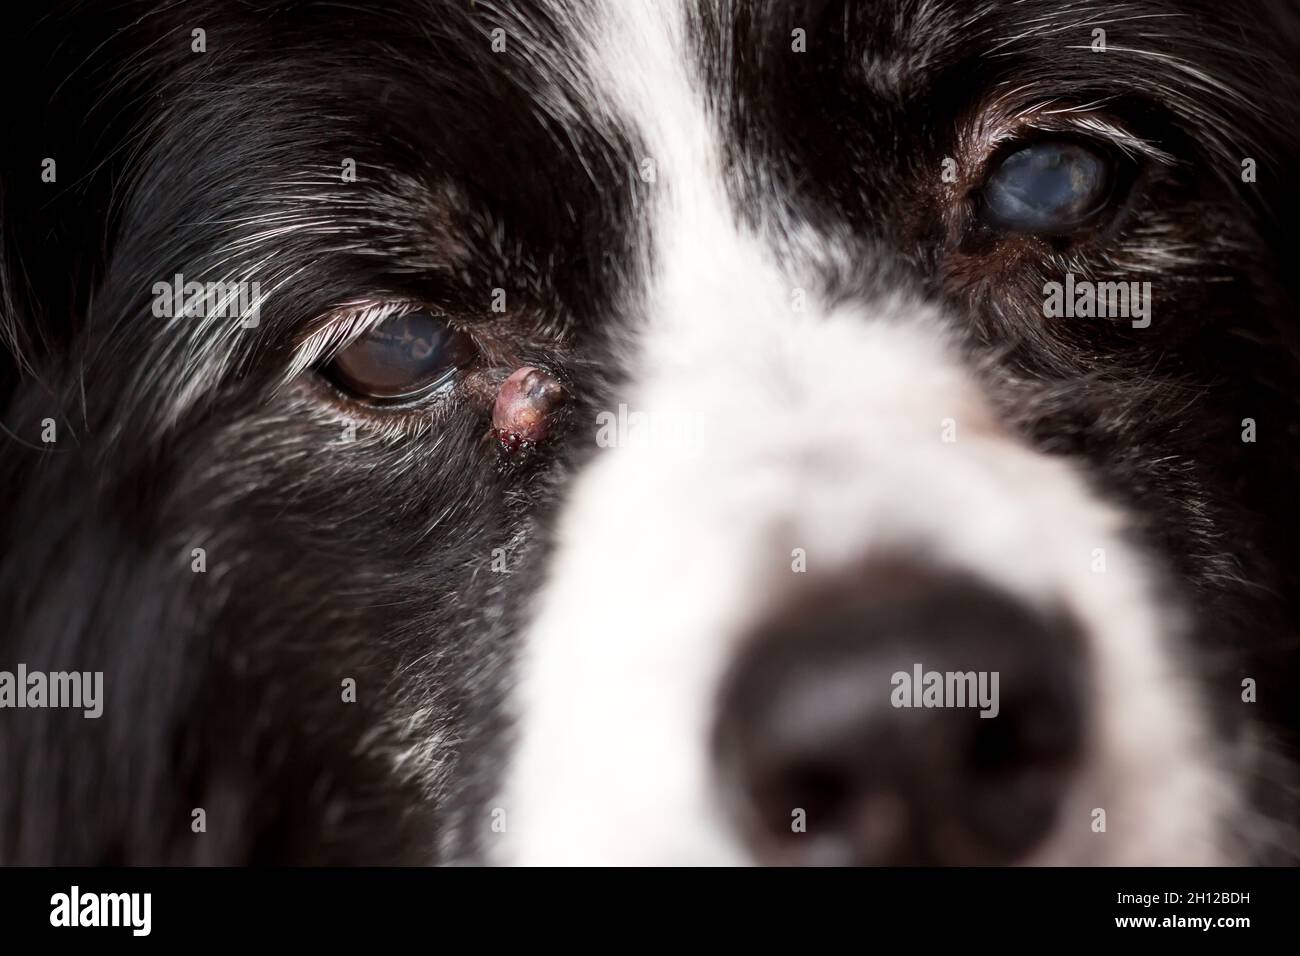 A senior dog with an inflamed sebaceous cyst near its eye Stock Photo